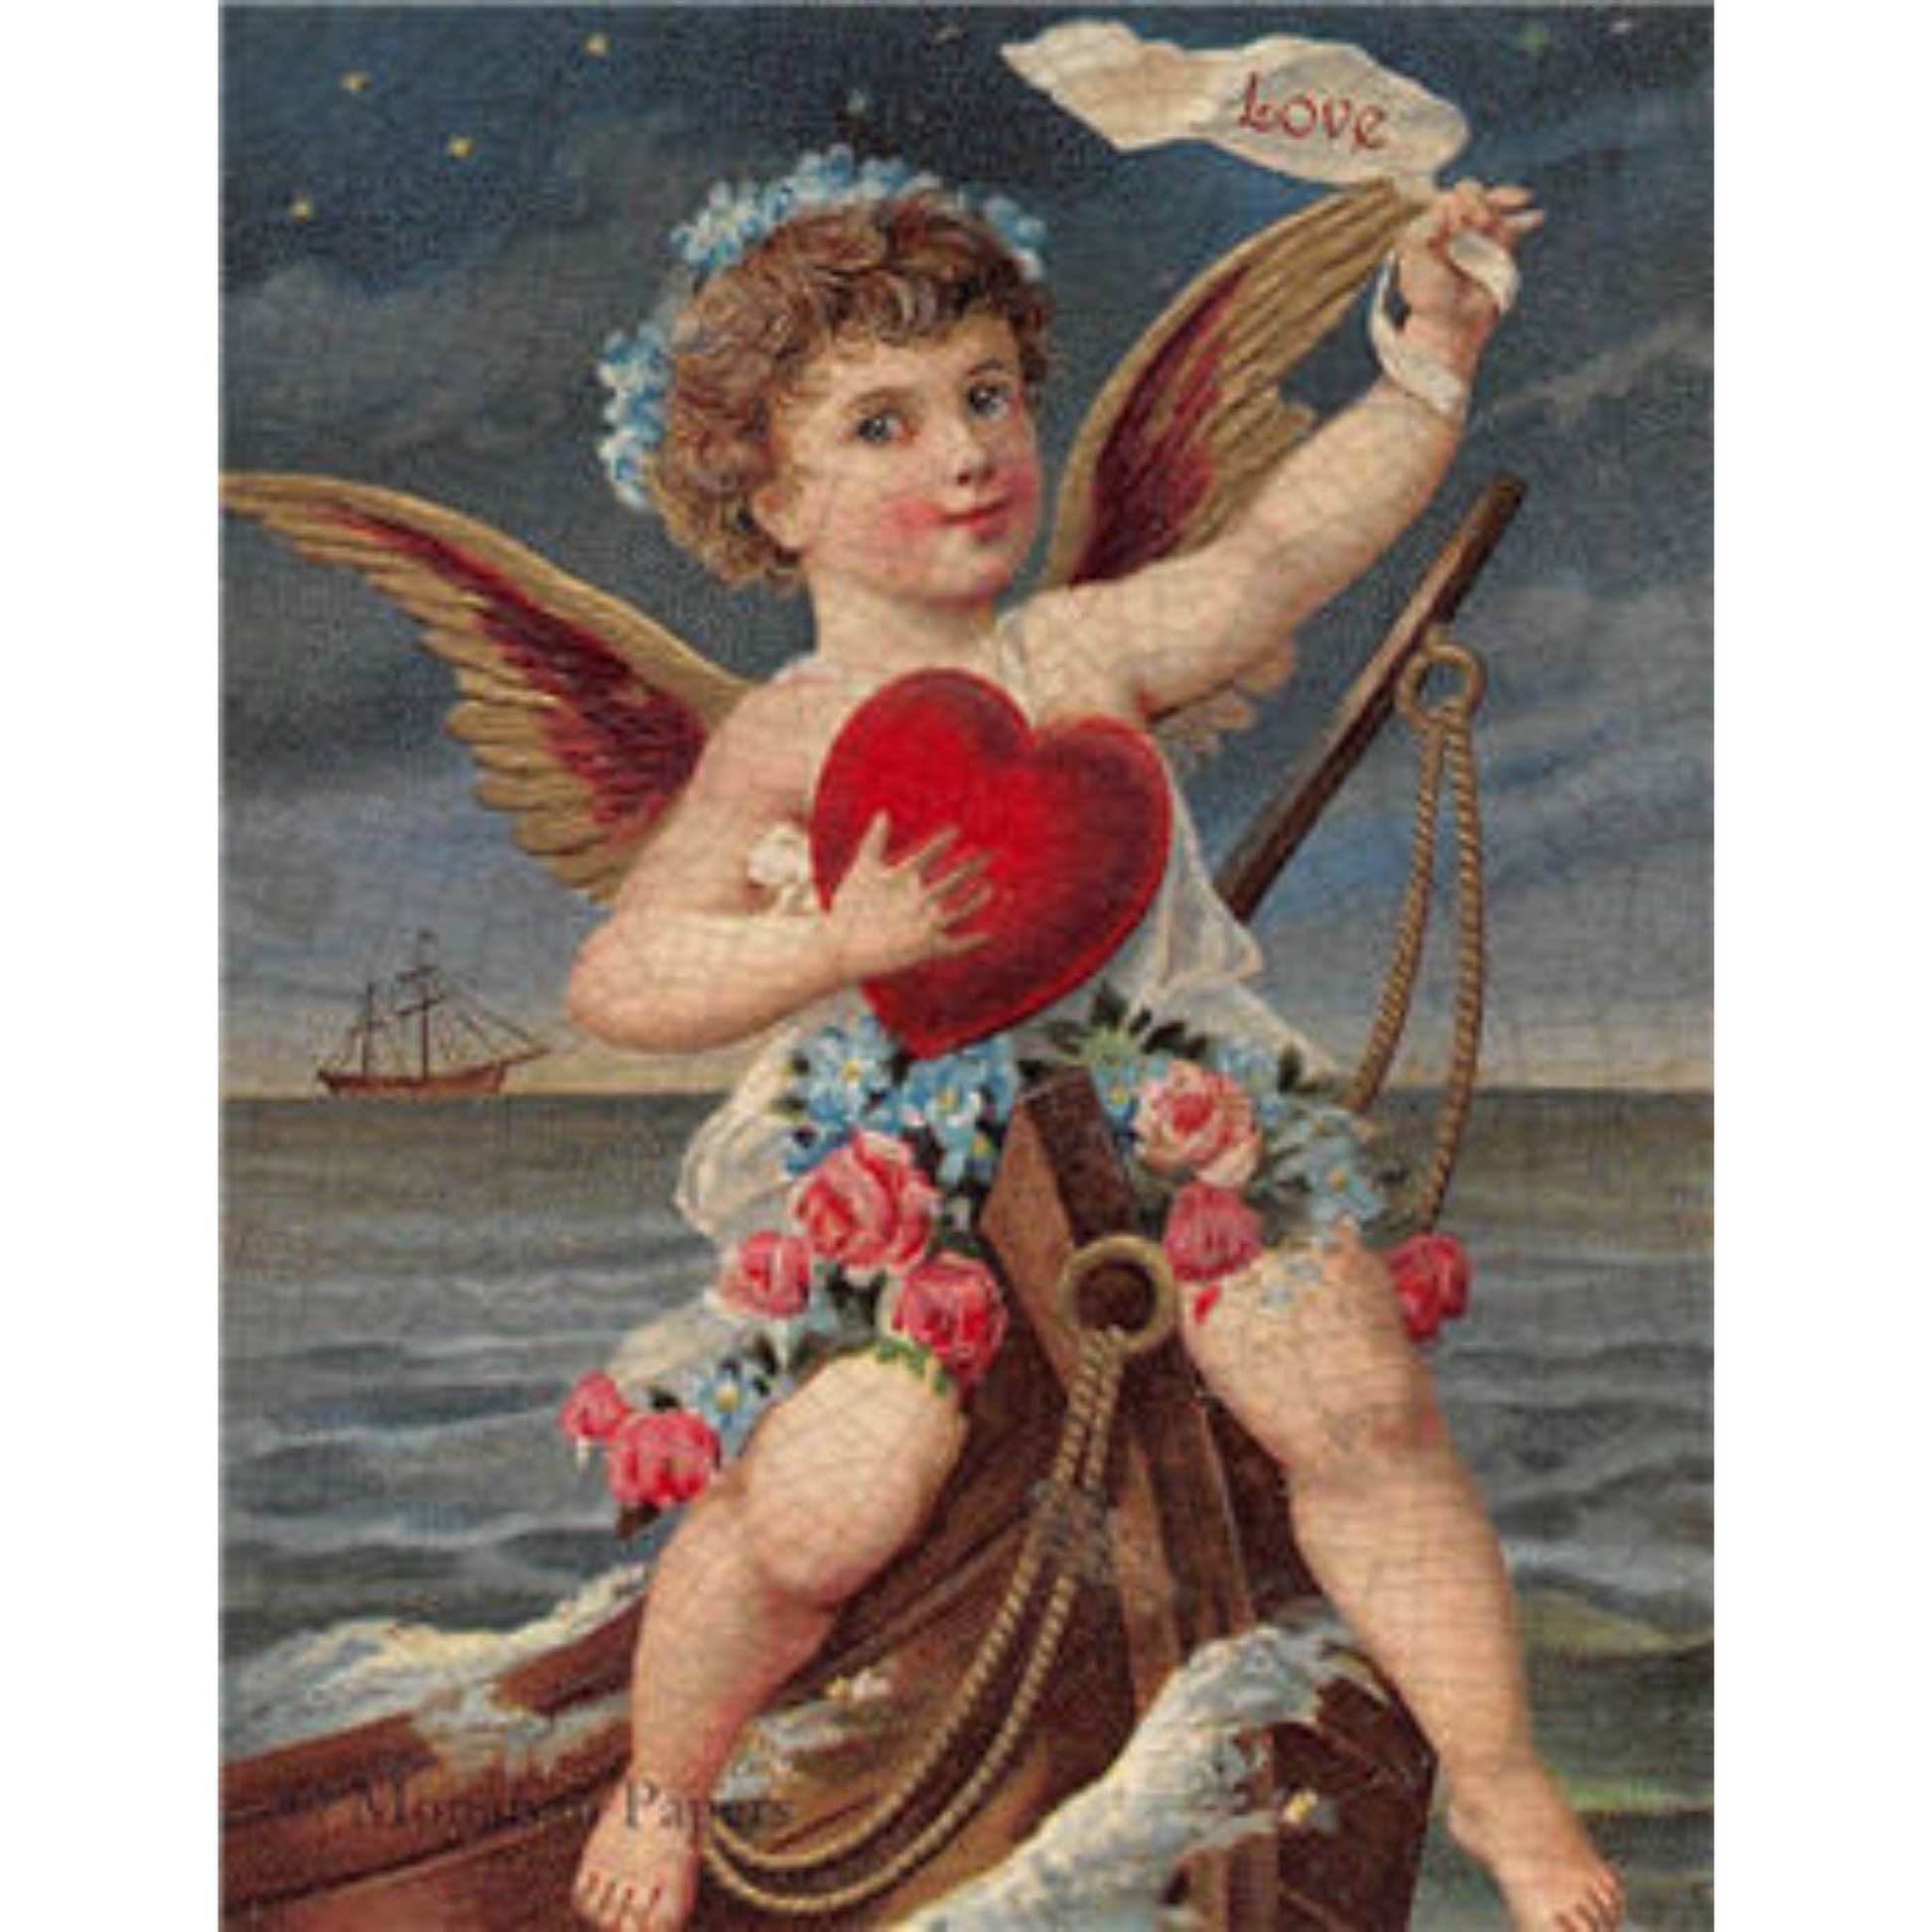 Love-Valentine's Day  Decoupage Paper by Monahan Papers available at Milton's Daughter. Cupid holding heart sailing on boat.  11" x 17".